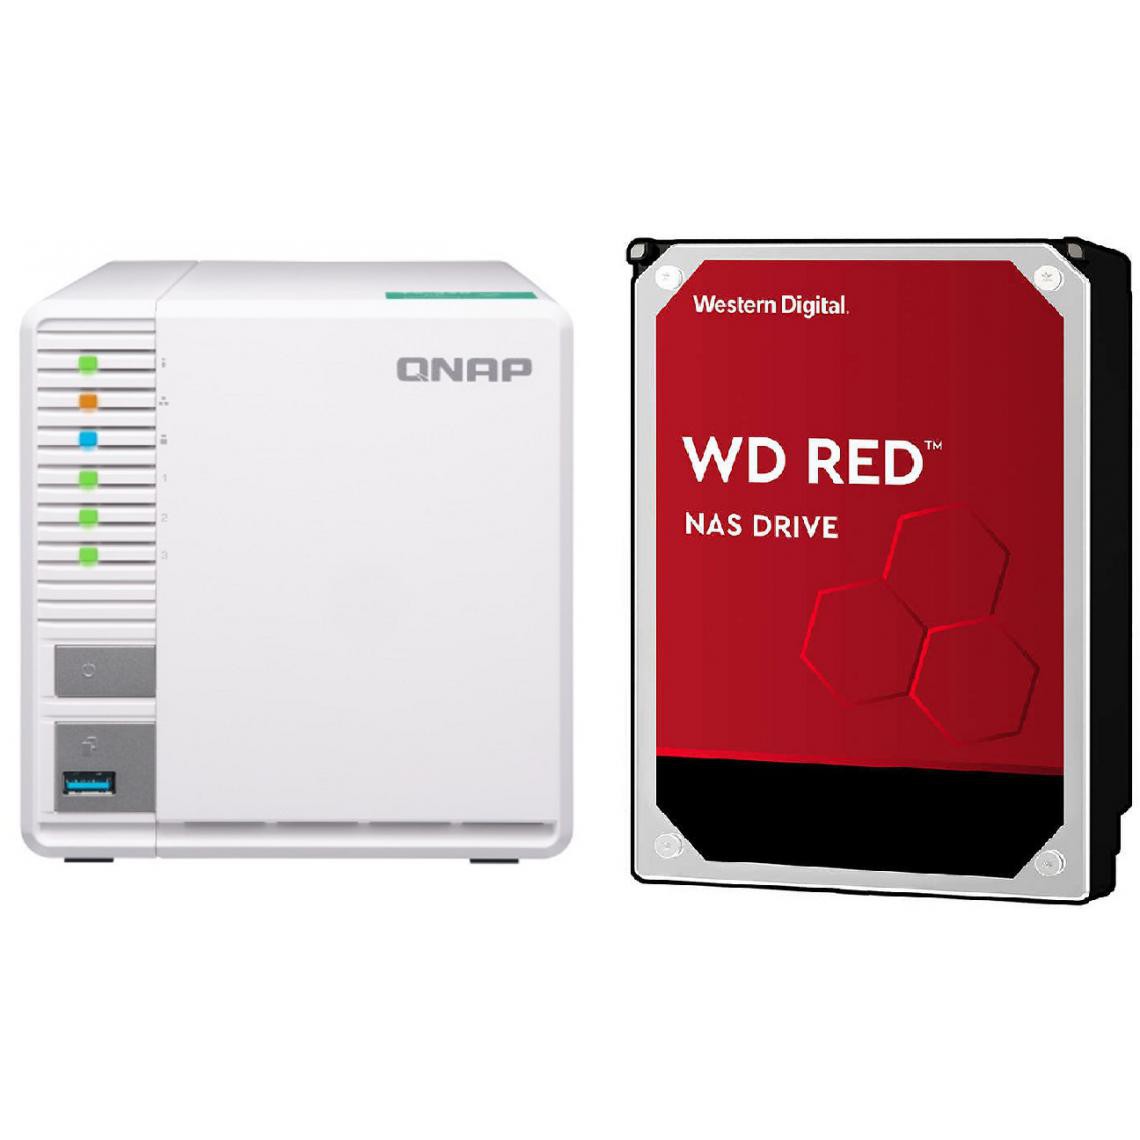 Qnap - TS-328 - 3 baies + 3 WD RED 4 To - 3,5" SATA III 6 Go/s - Cache 256 Mo - Rouge - NAS